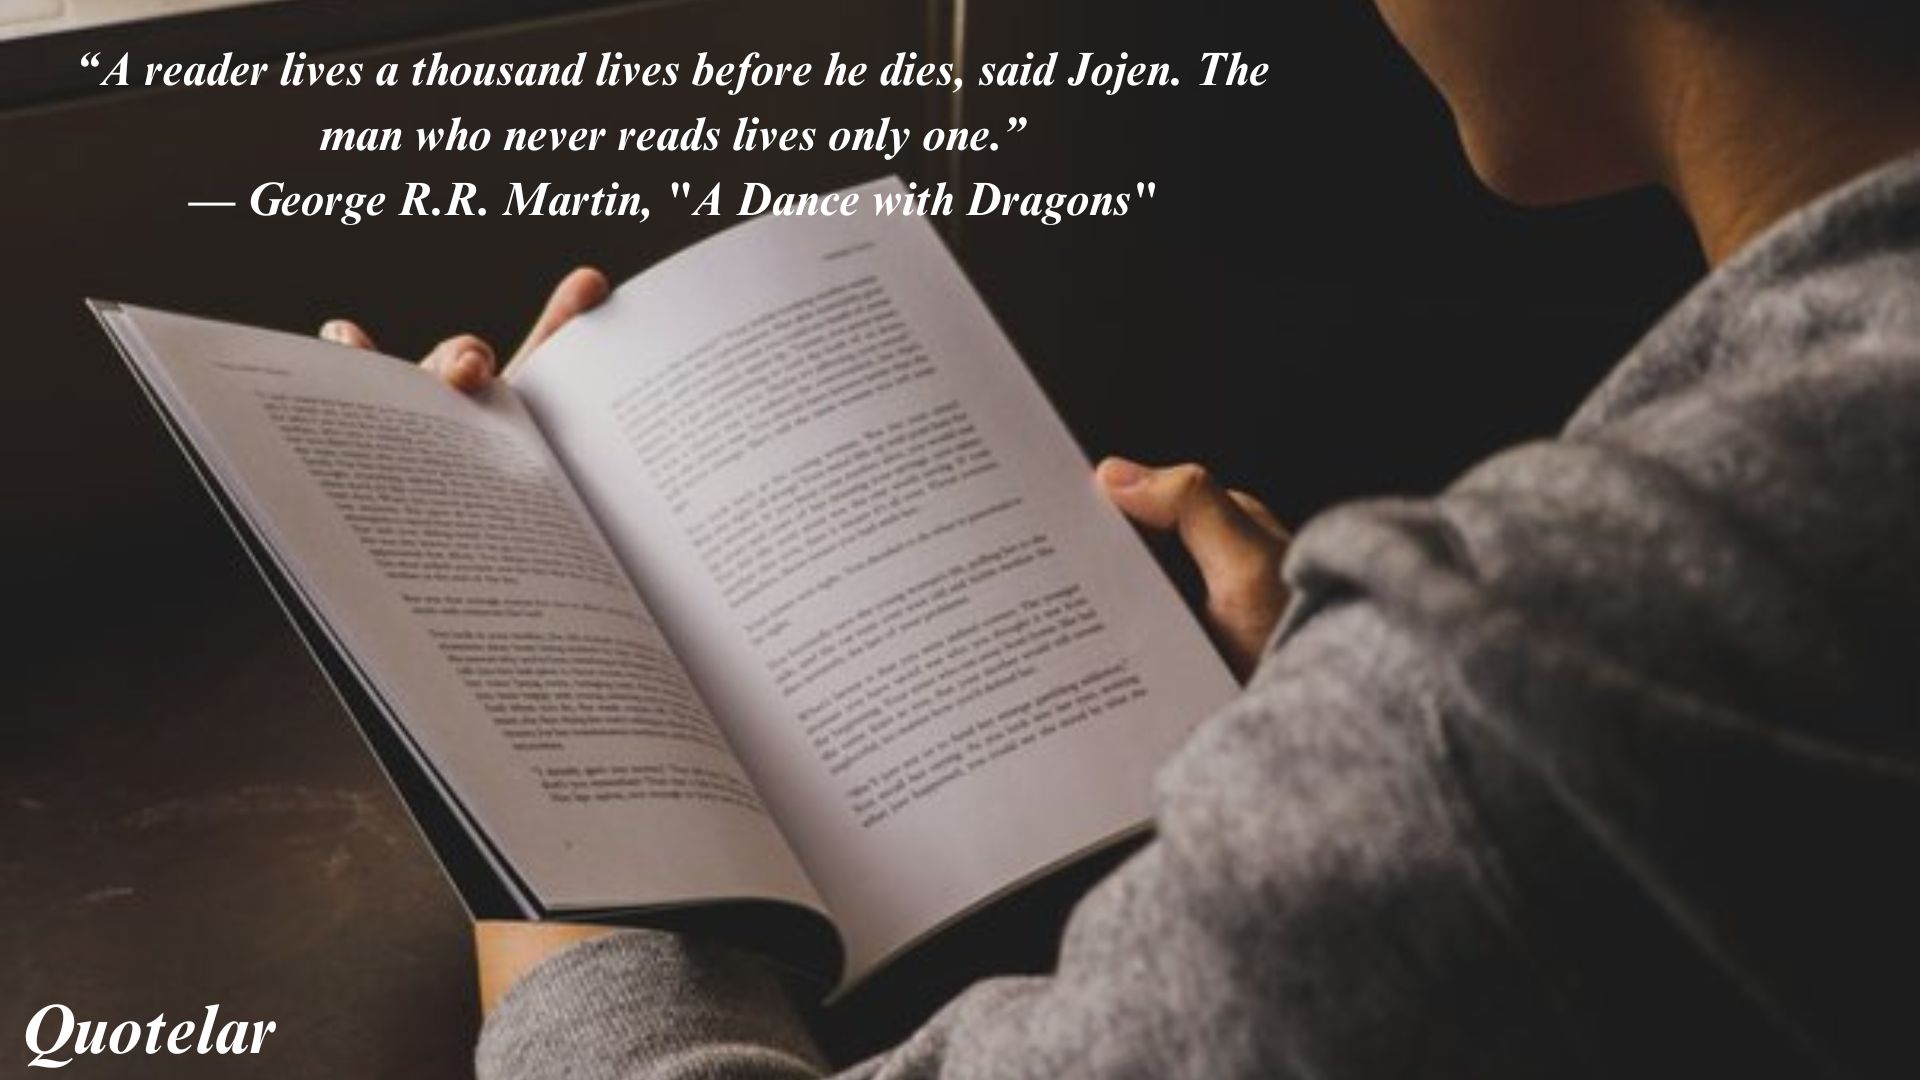 Book Quotes About Reading